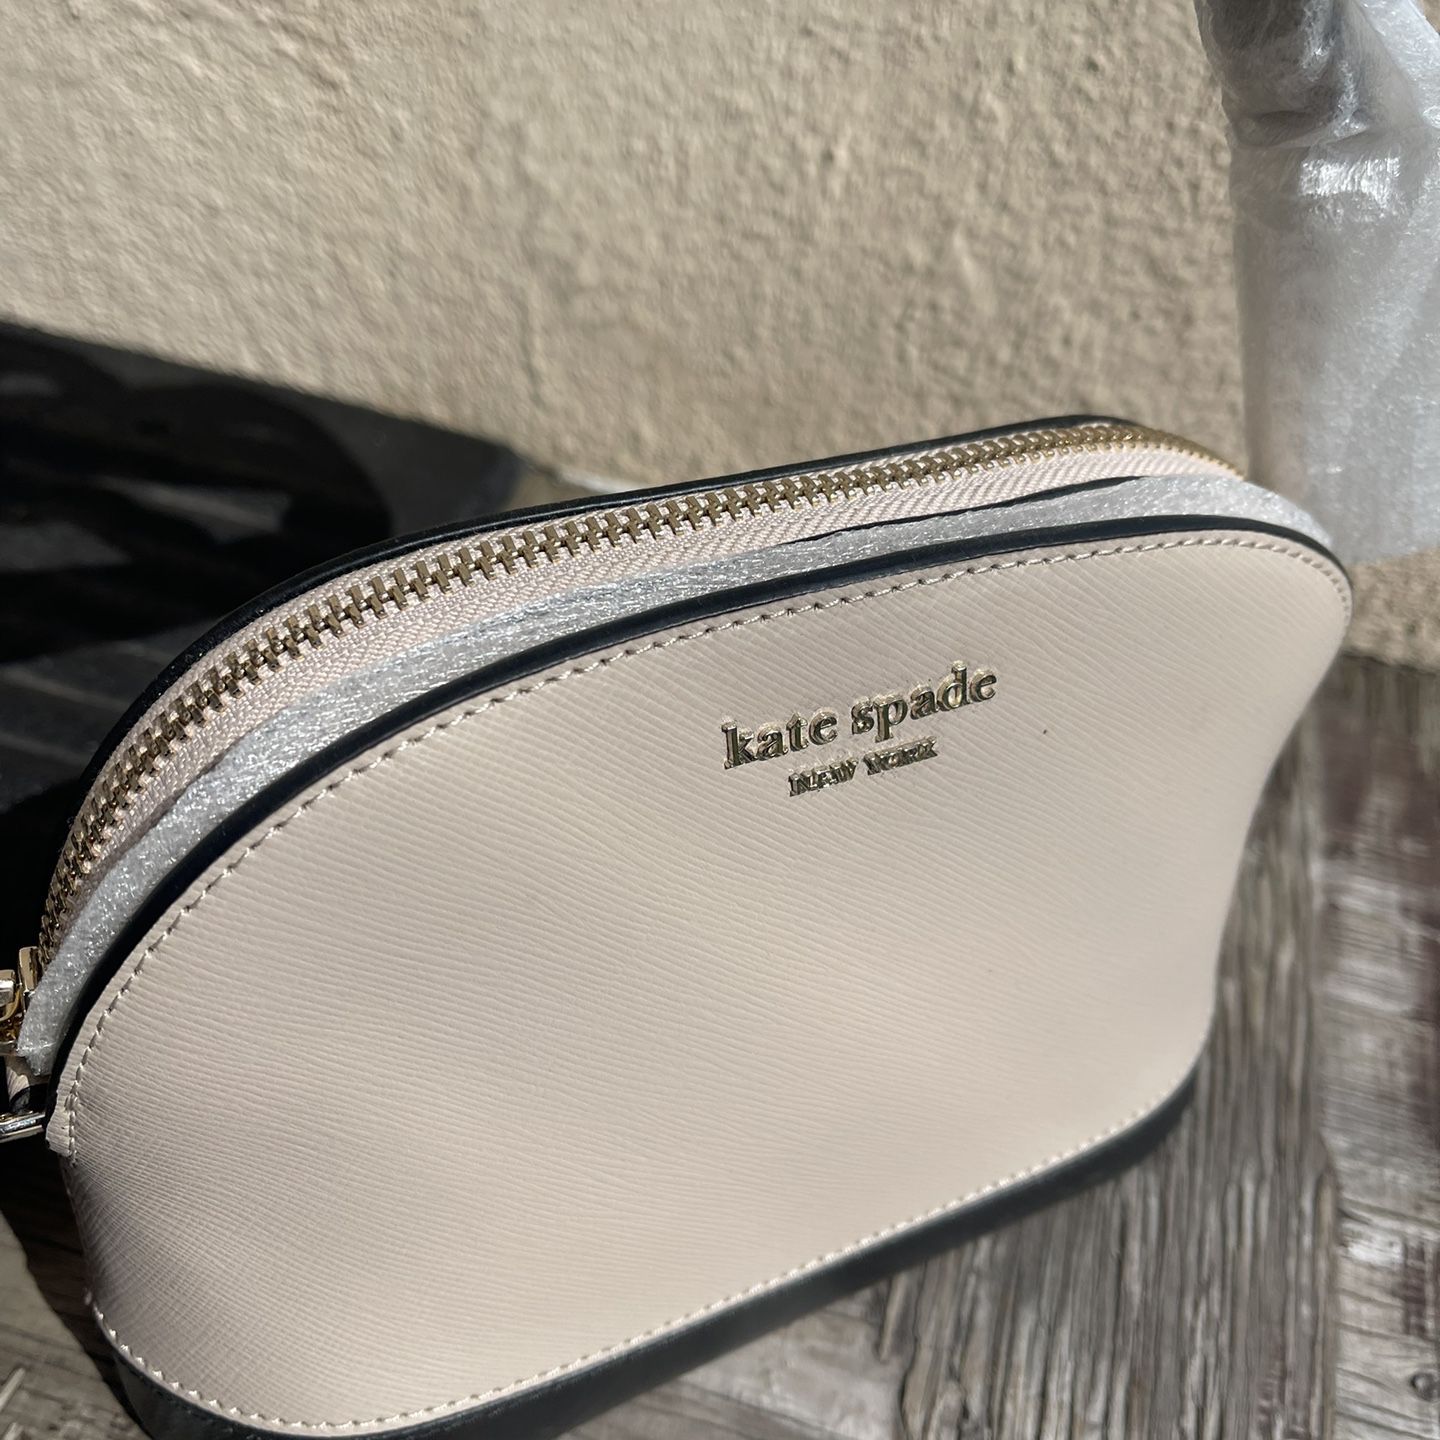 Navy Blue Kate Spade Bag for Sale in Los Angeles, CA - OfferUp